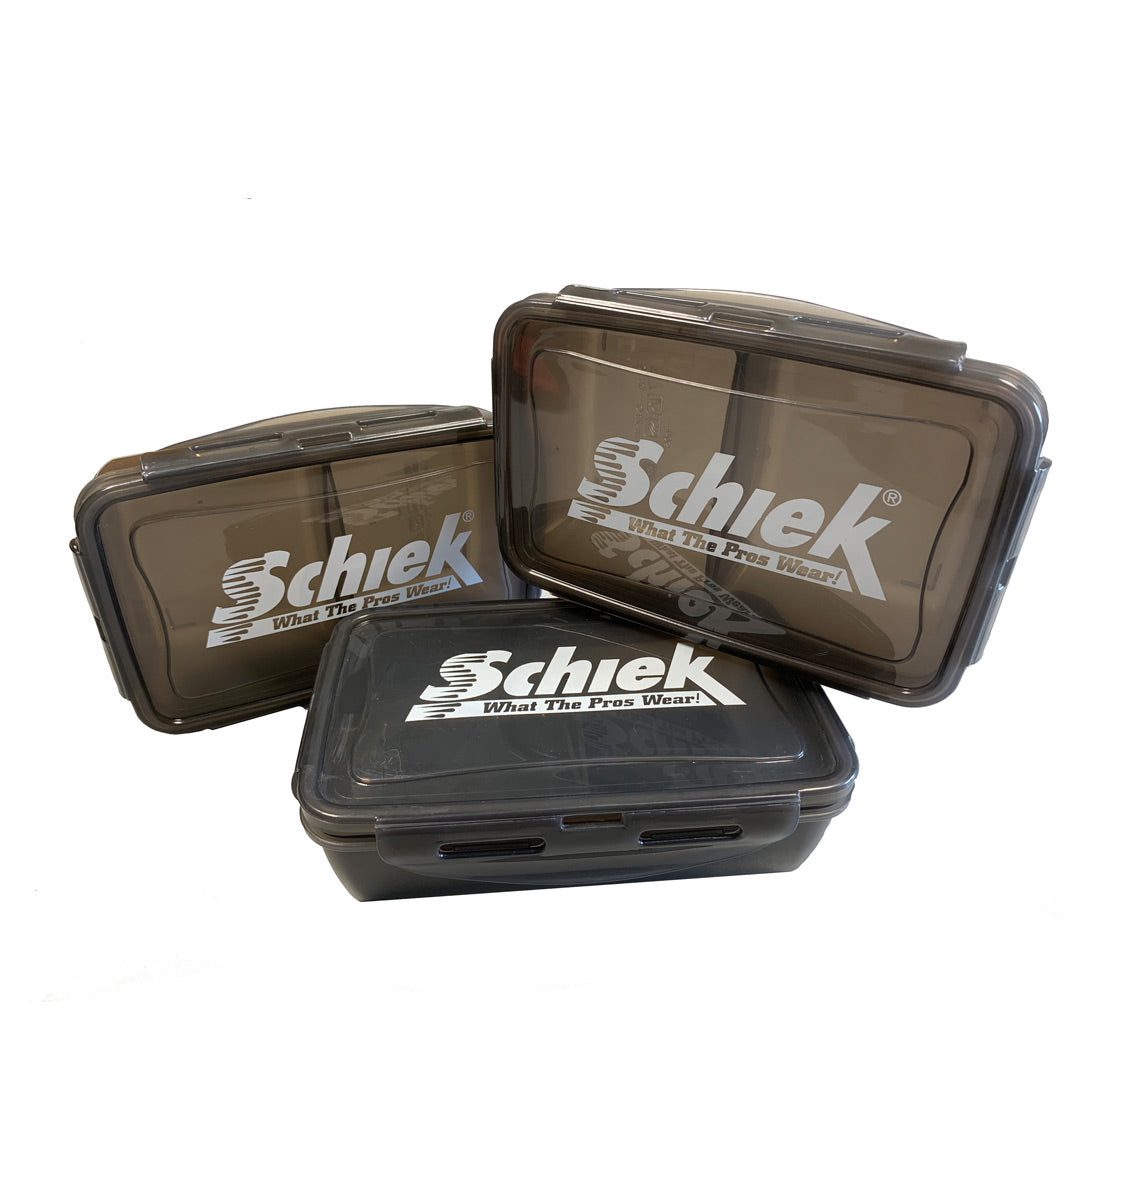 700MP Schiek Meal Prep Bag Containers